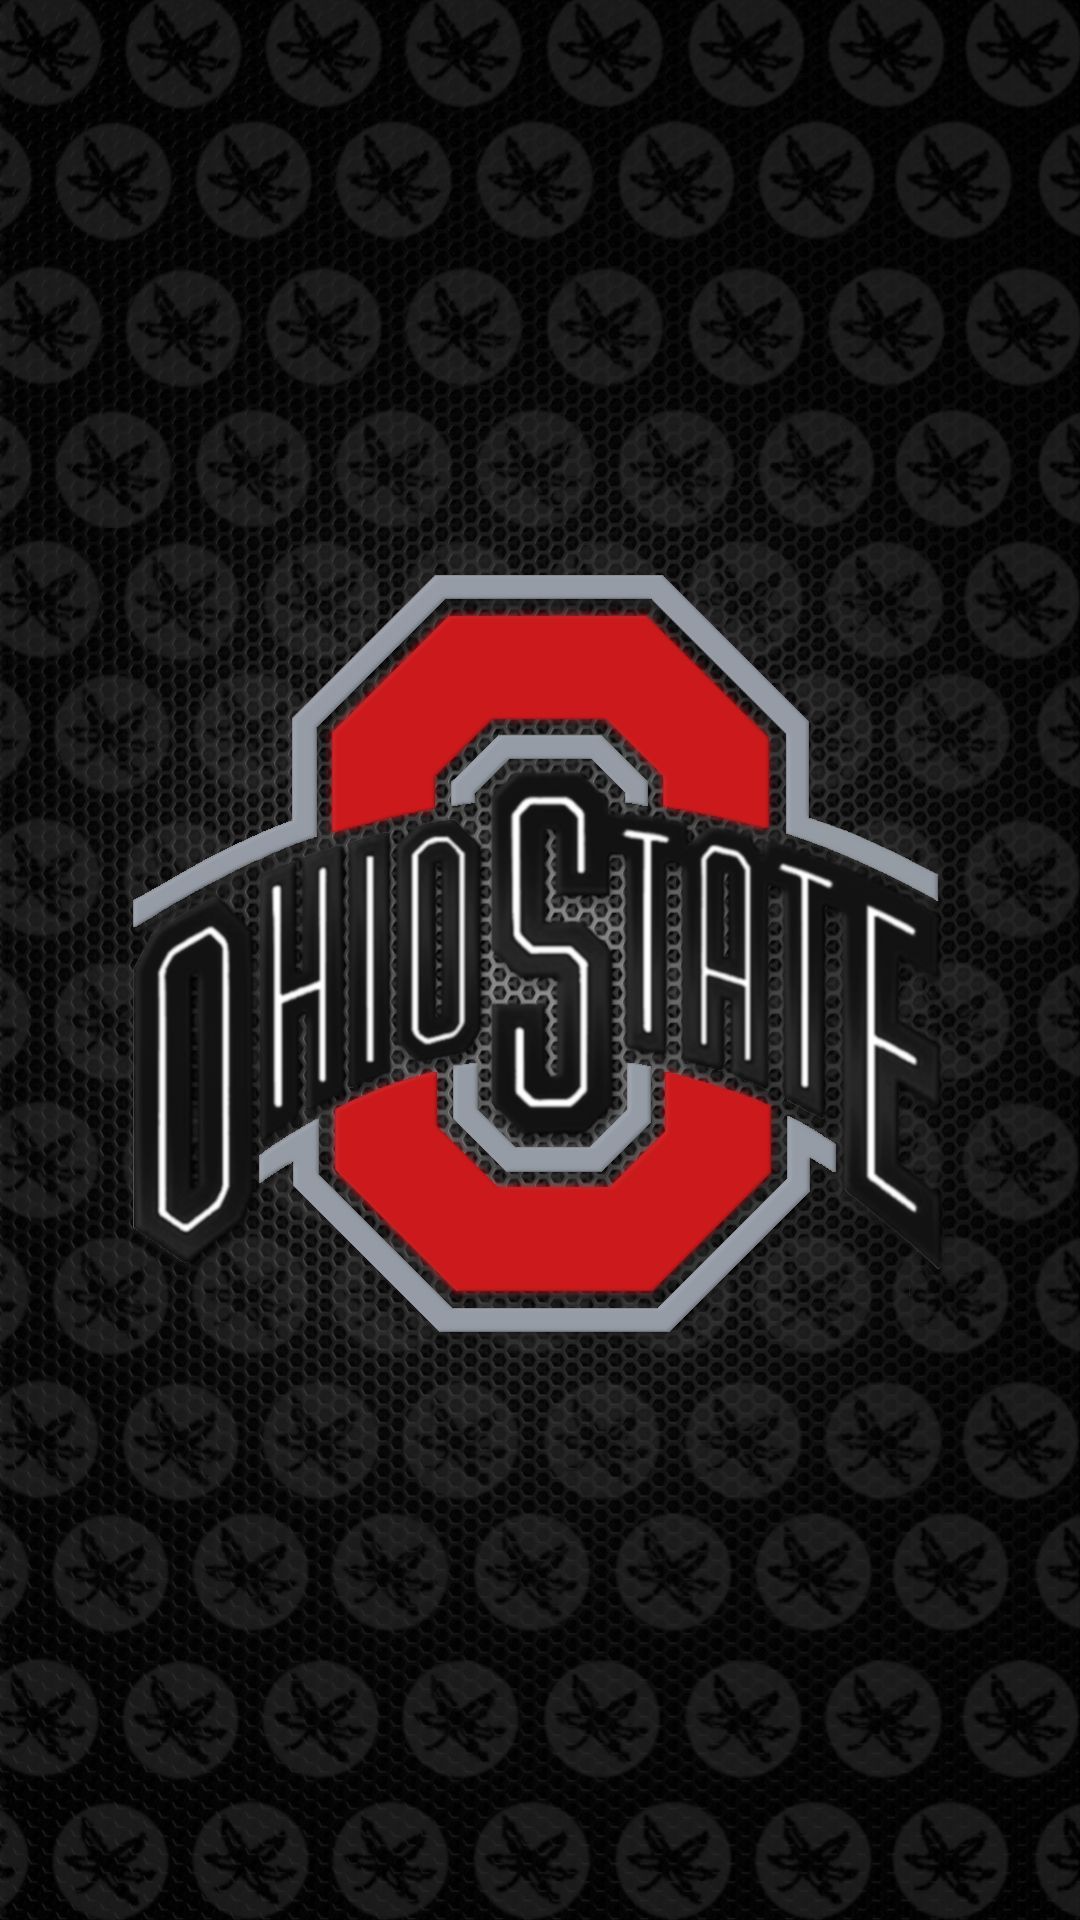 OSU Wallpaper 851 For iPhone 7 & 8 plus. Ohio state wallpaper, Ohio state football, Ohio state university